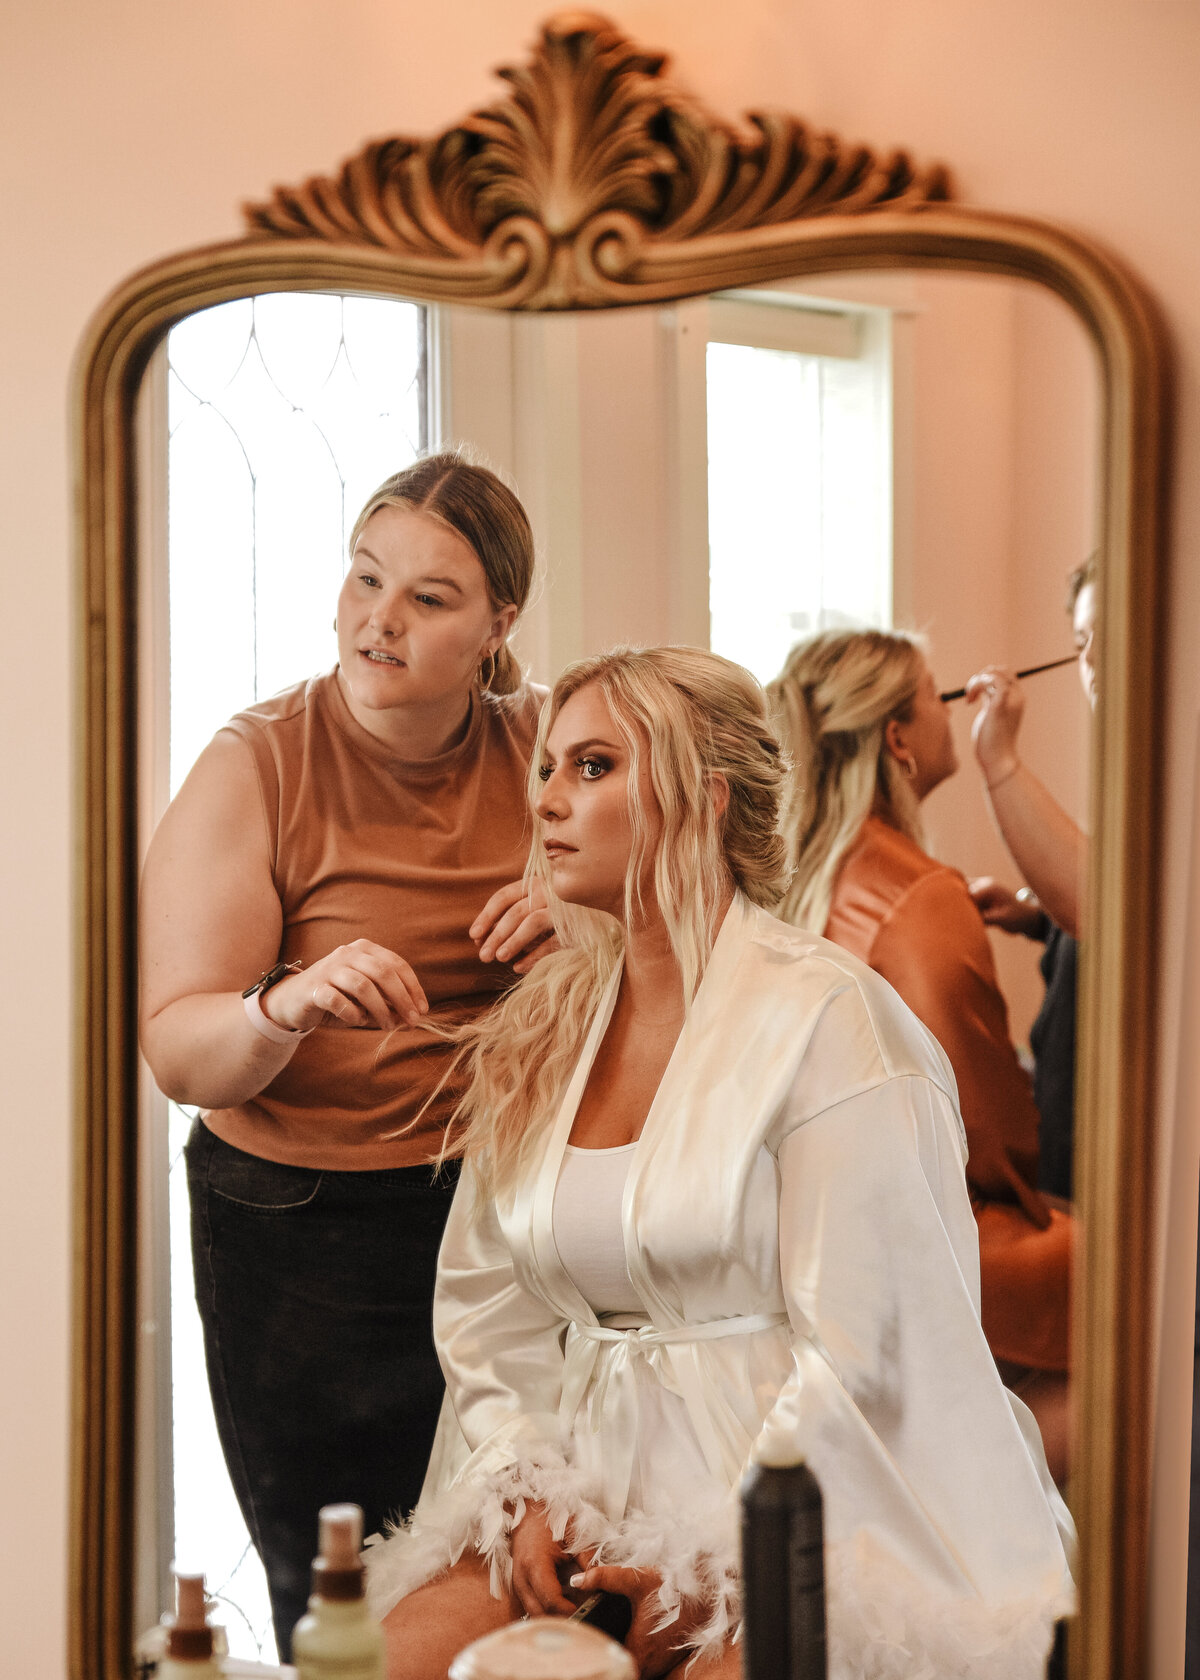 A makeup artist attentively applies cosmetics to a woman seated in front of an ornate mirror, as they both focus on perfecting the look for a special occasion taken by jen Jarmuzek photography a Minneapolis wedding photographer